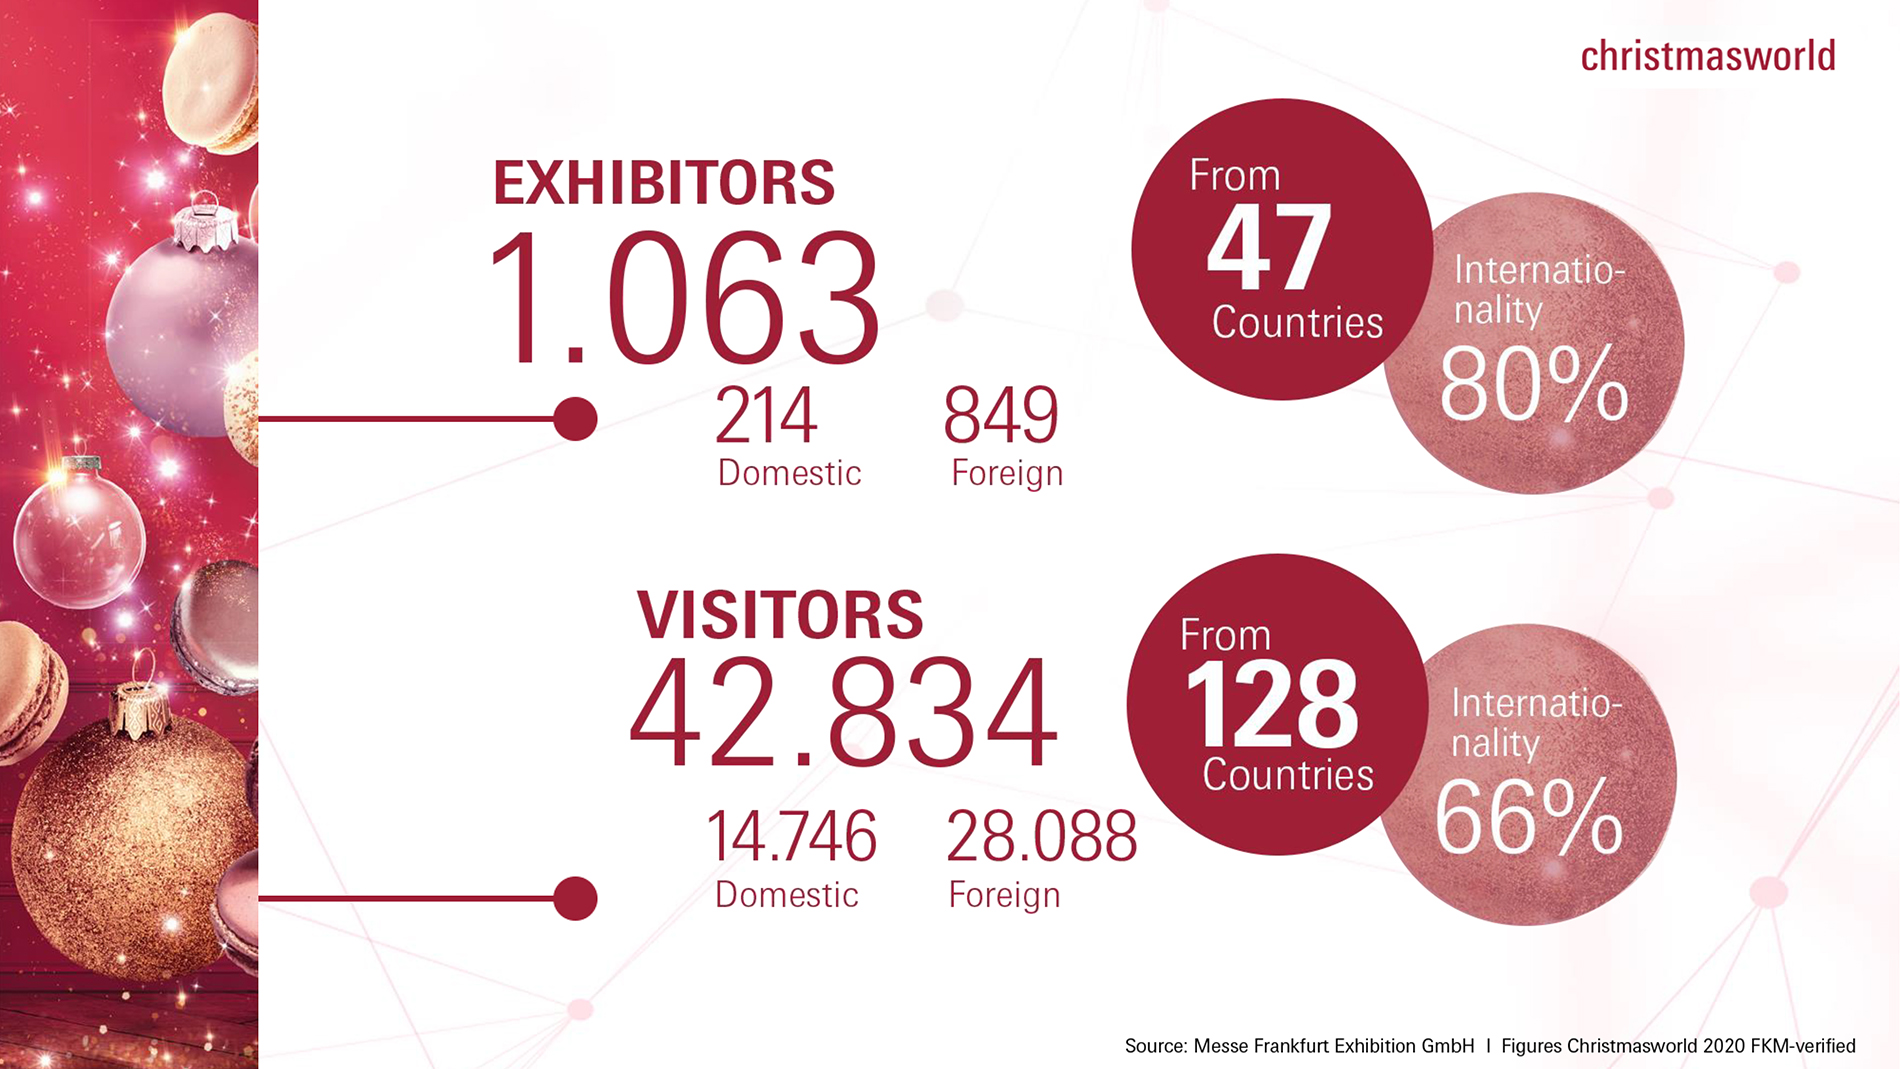 number of exhibitors and visitors of Christmasworld 2020